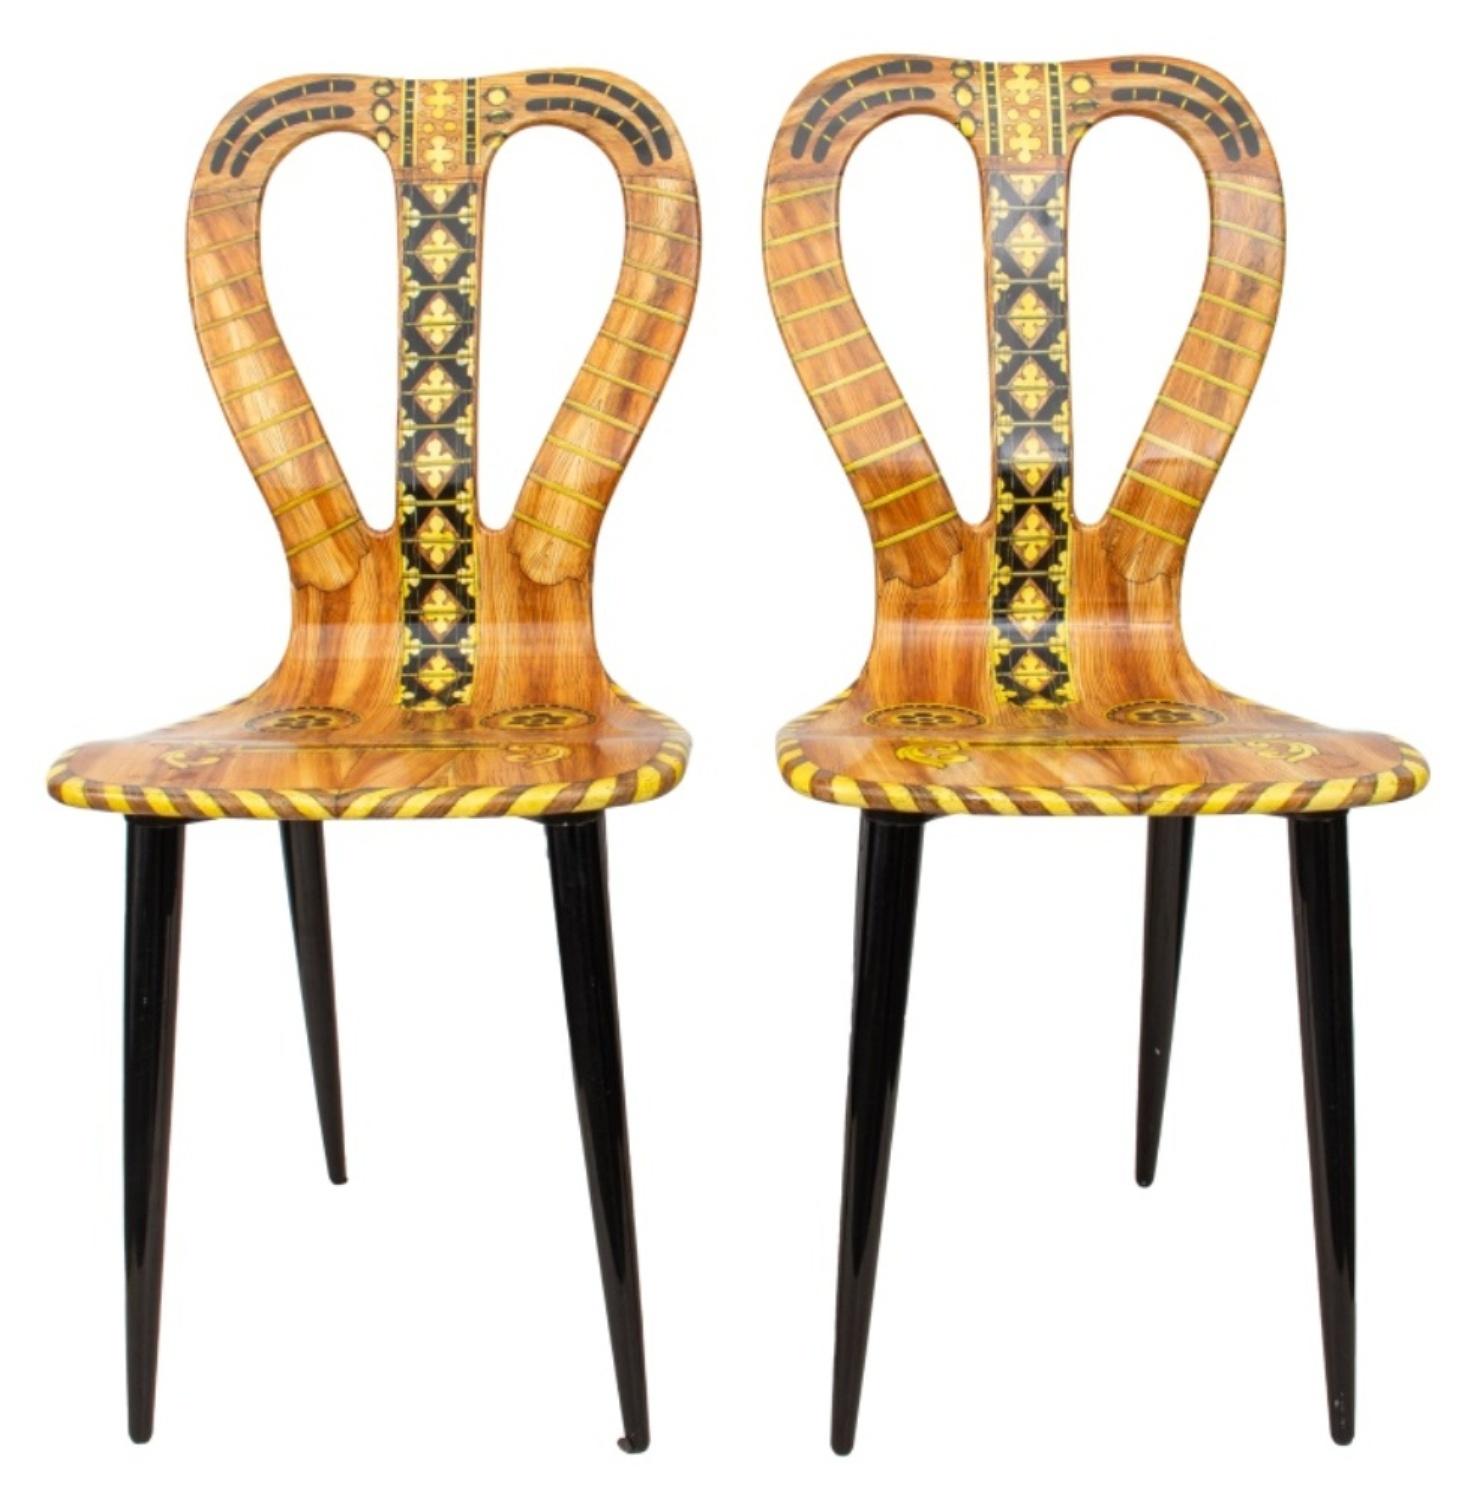 Piero Fornasetti (Italian, 1913-1988) pair of Musicale guitar chairs, lithographed and lacquered wood, originally designed 1951, marked on bottom and with signature on lower back.

Dimensions: 37.75